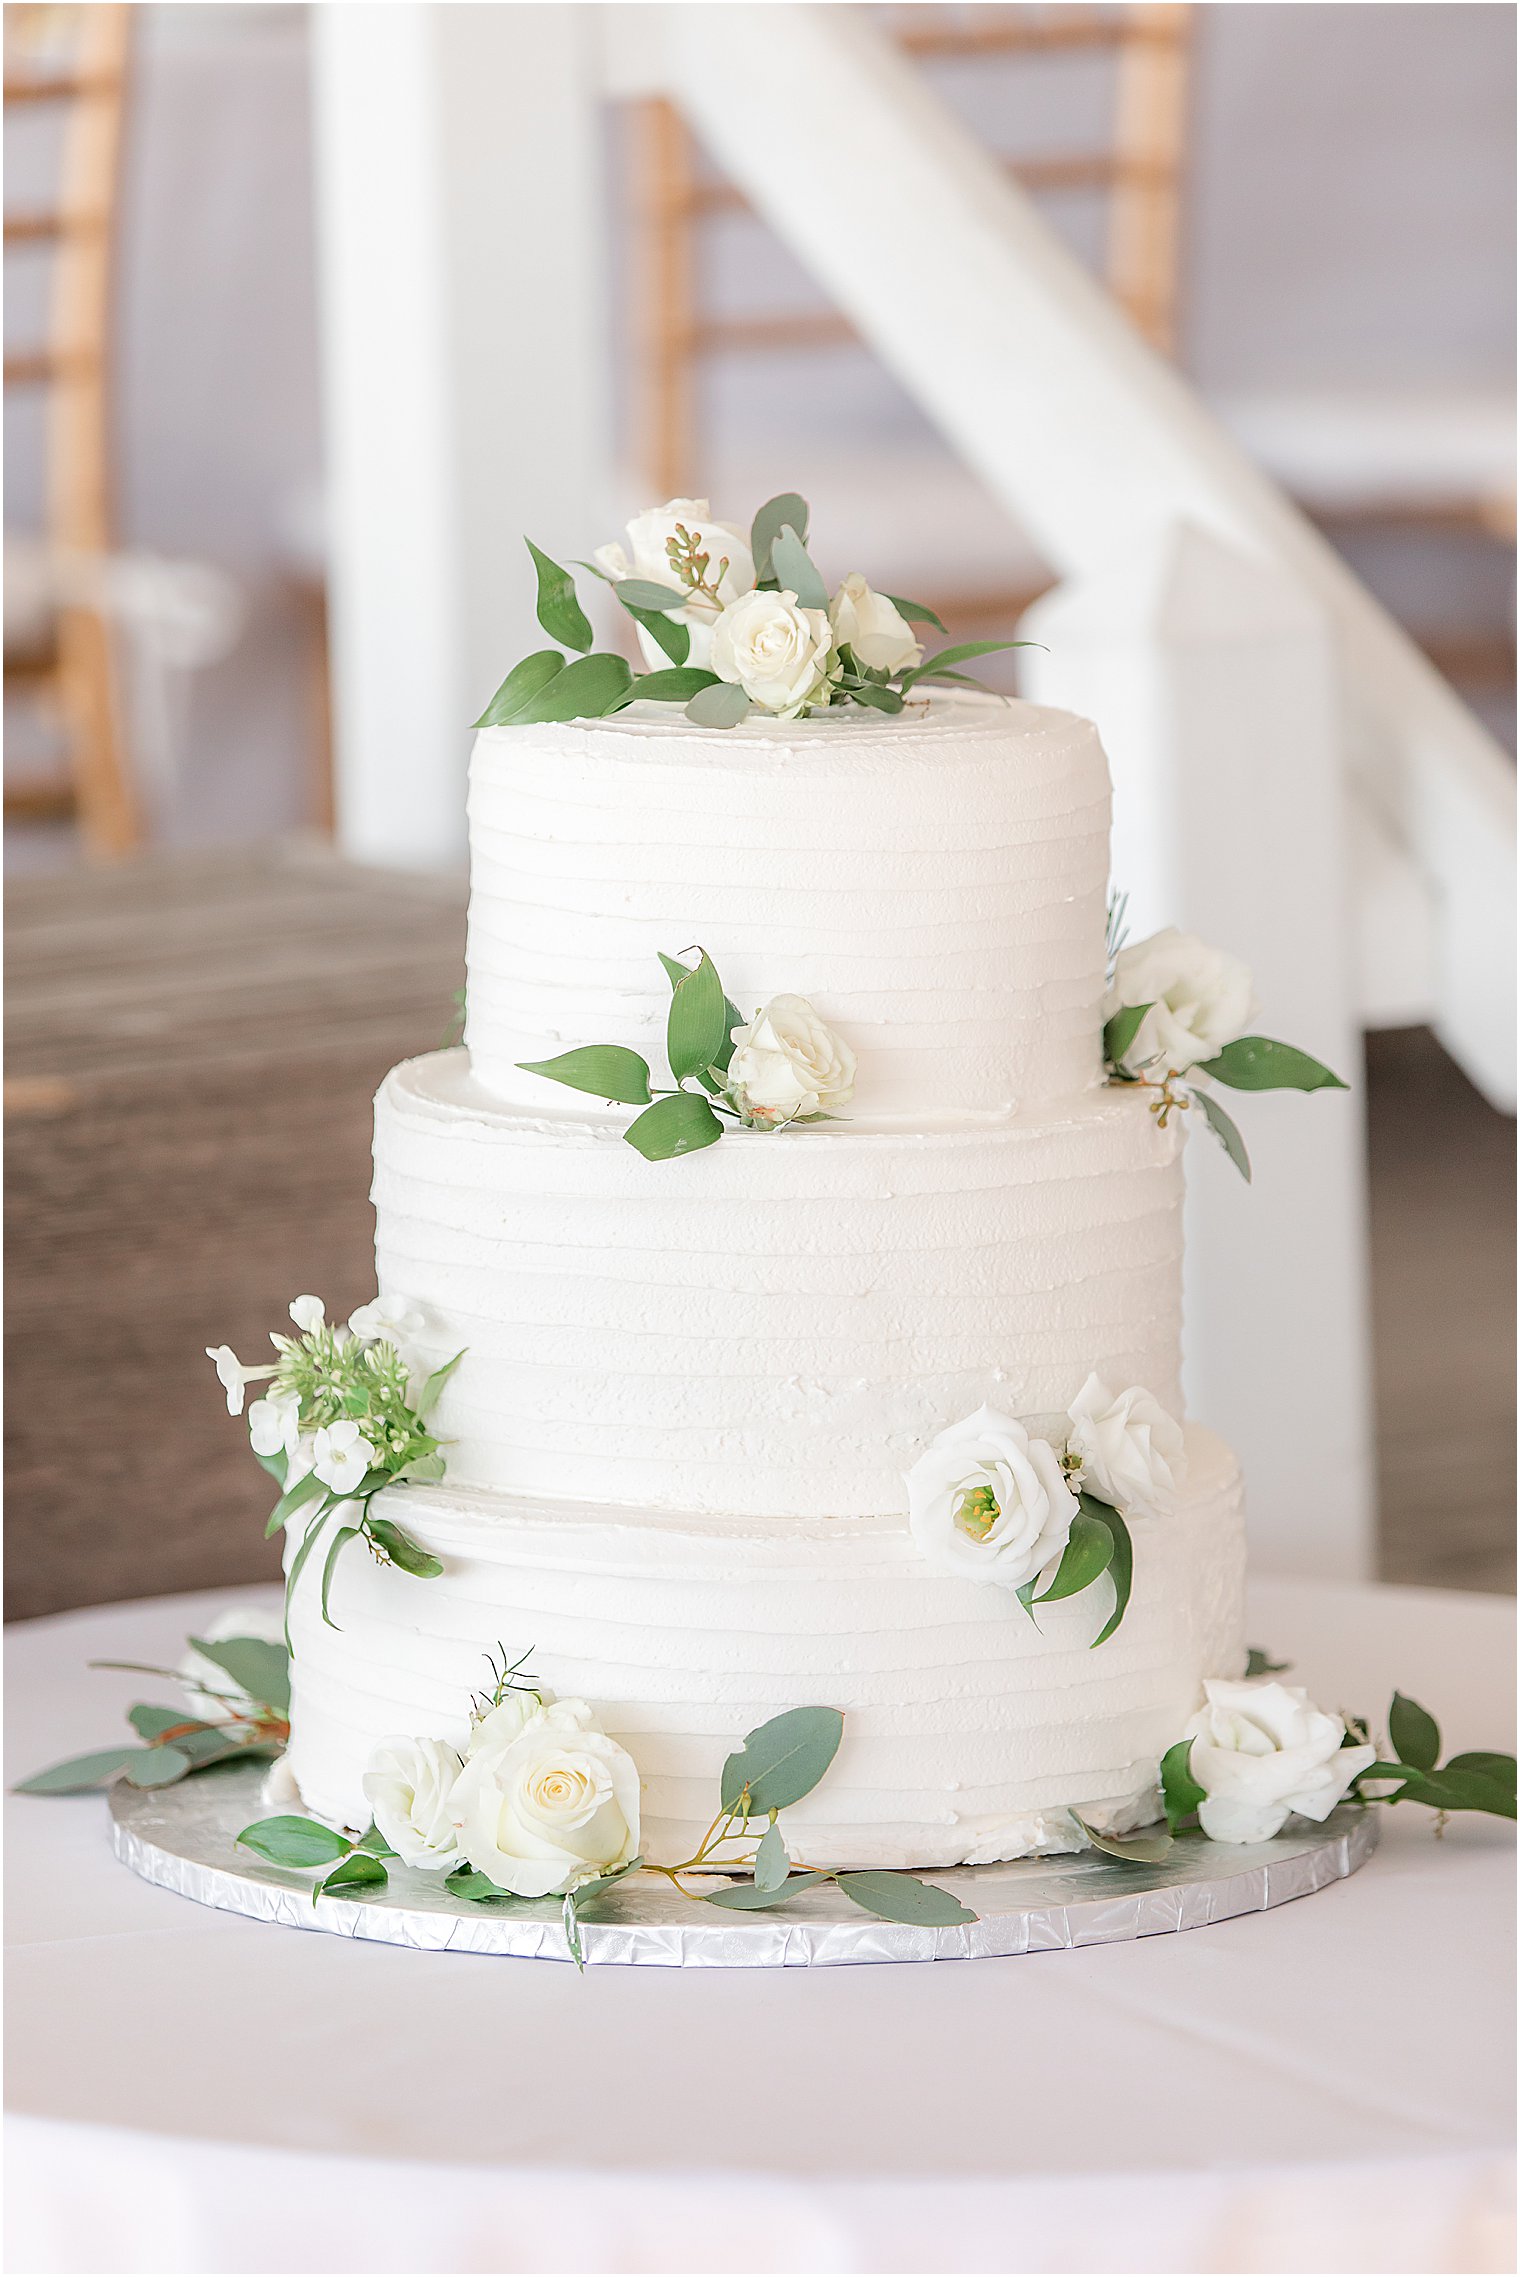 tiered wedding cake with simple flowers from Mueller's Bakery, one of the talented wedding cake designers in New Jersey